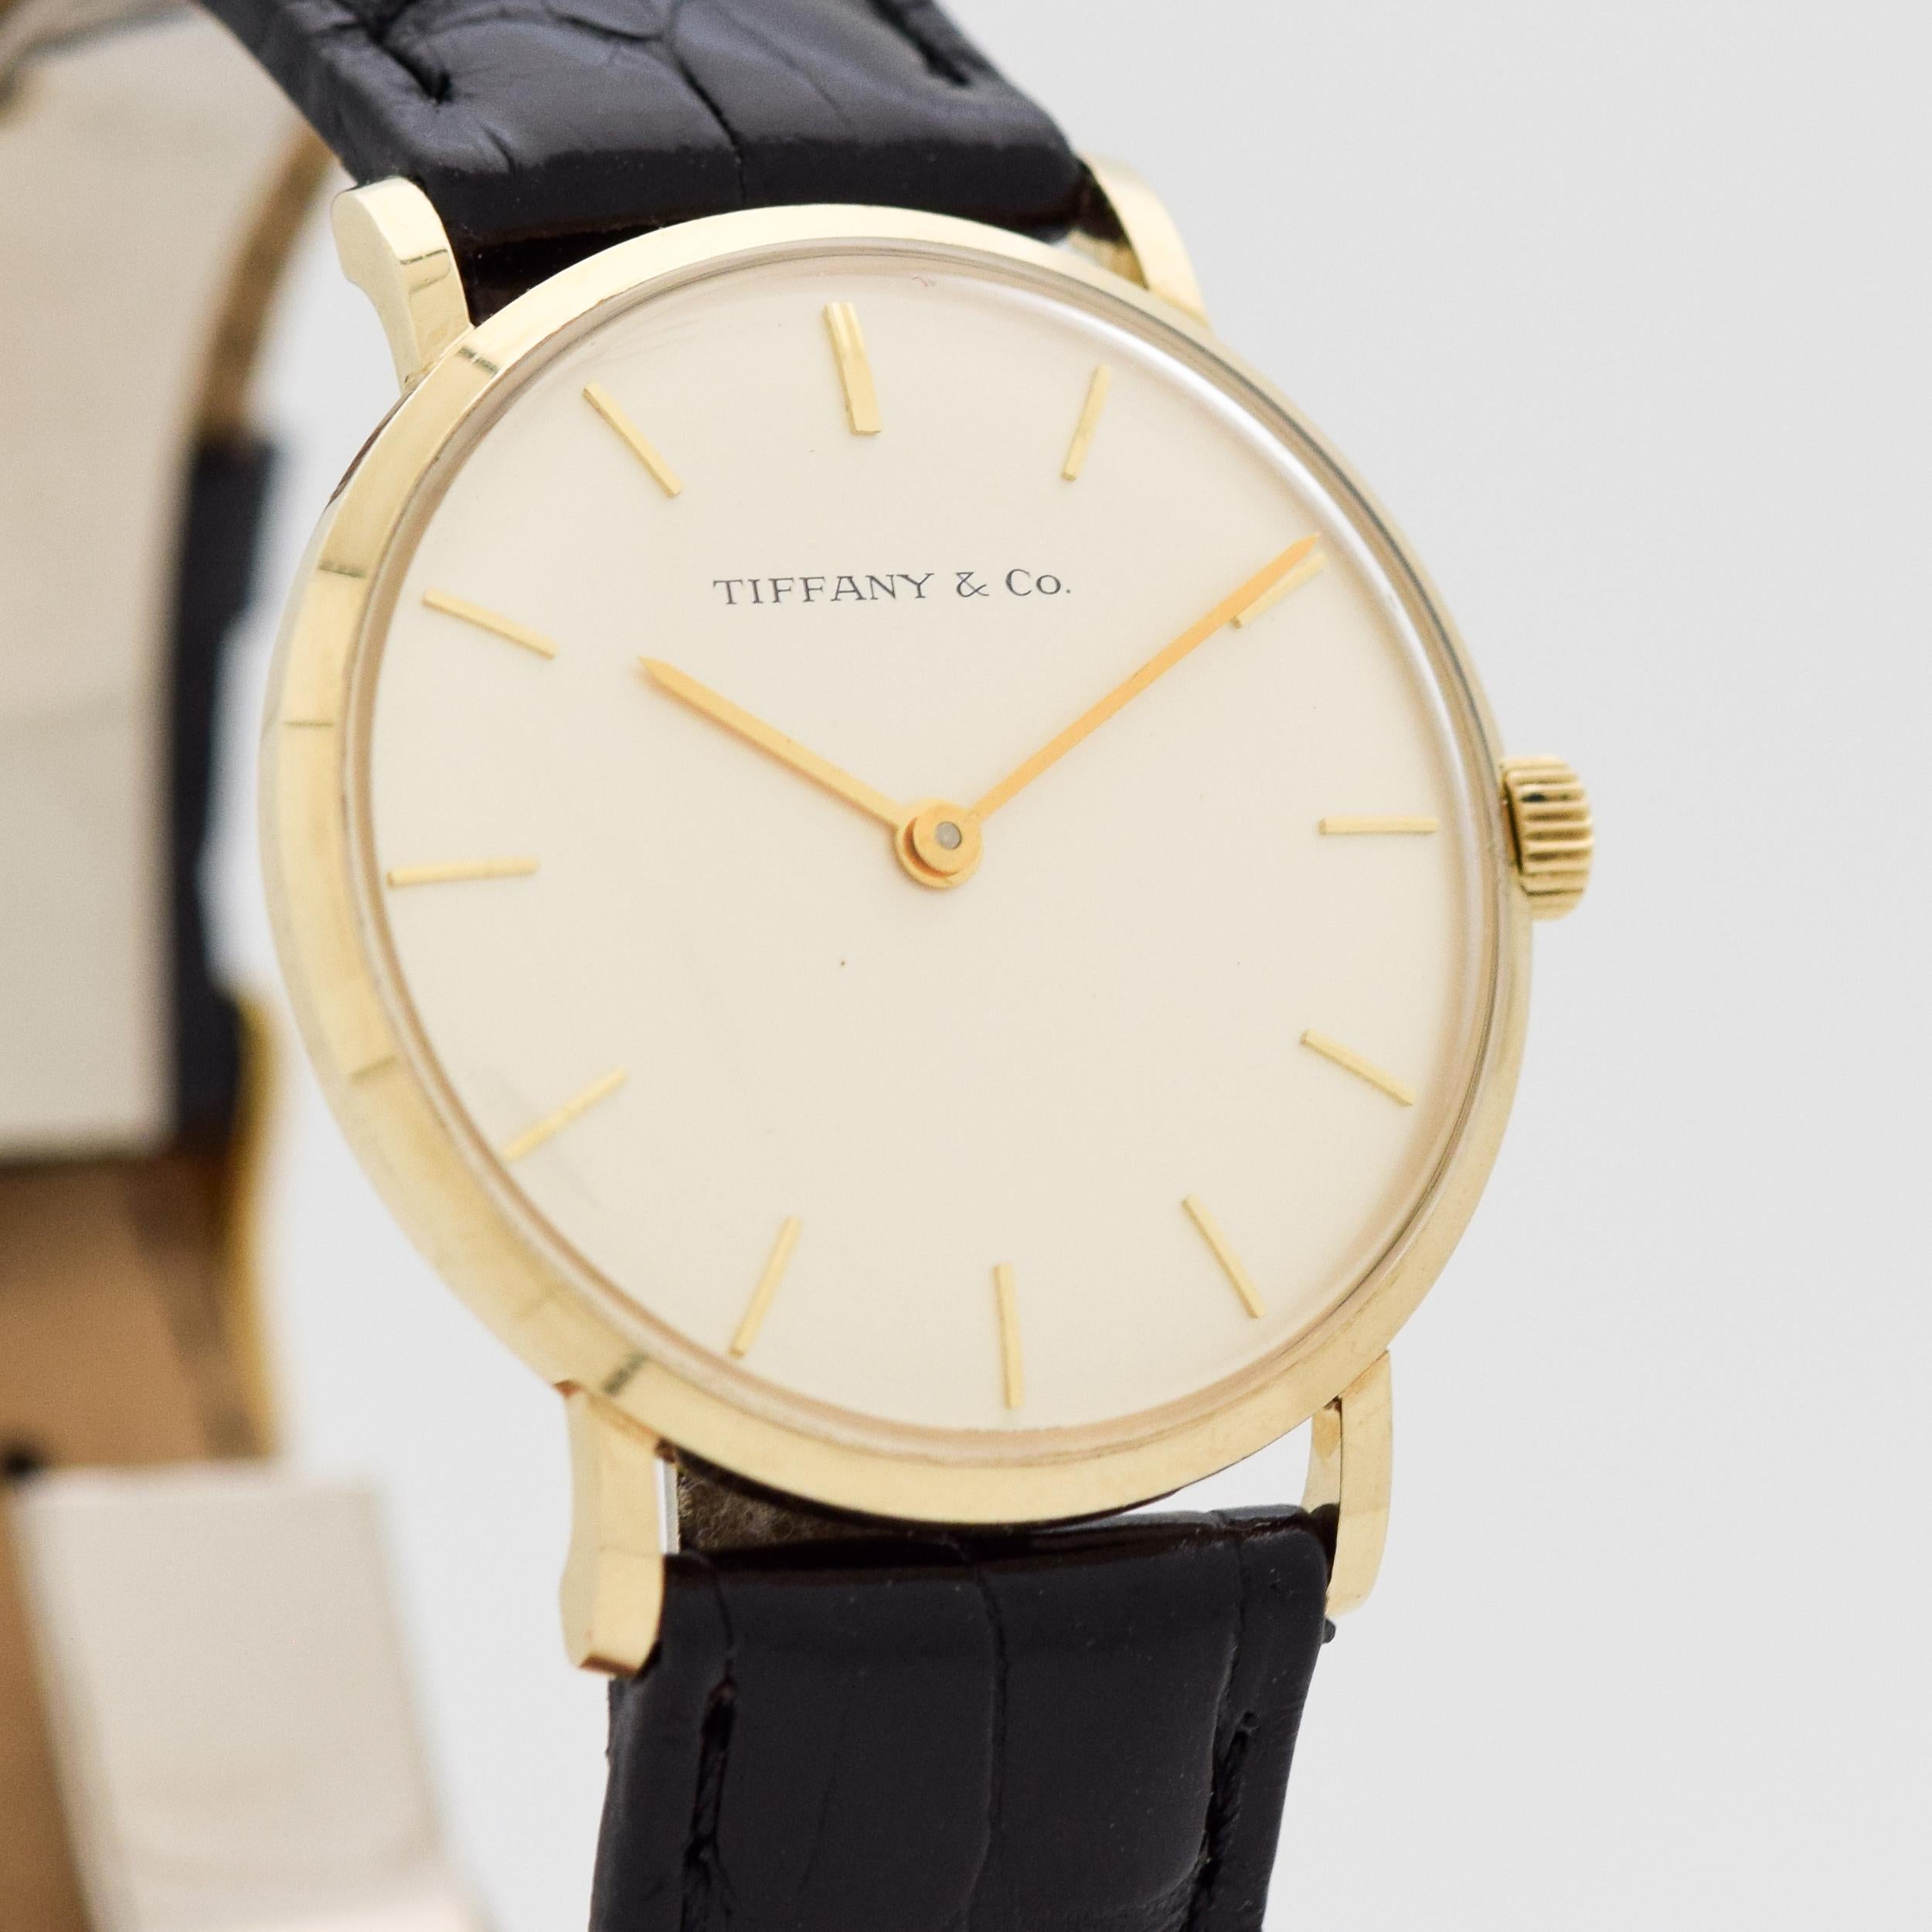 1969 Tiffany & Co. Ref. T 101-C 14K Yellow Gold Watch Rare Tiffany & Co, Recognition/Appreciation of Service with CBS (presented to R. Dunn, who was a cameraman with CBS for 43 years) watch Original Silver Dial with Applied Gold Stick Markers. 32mm